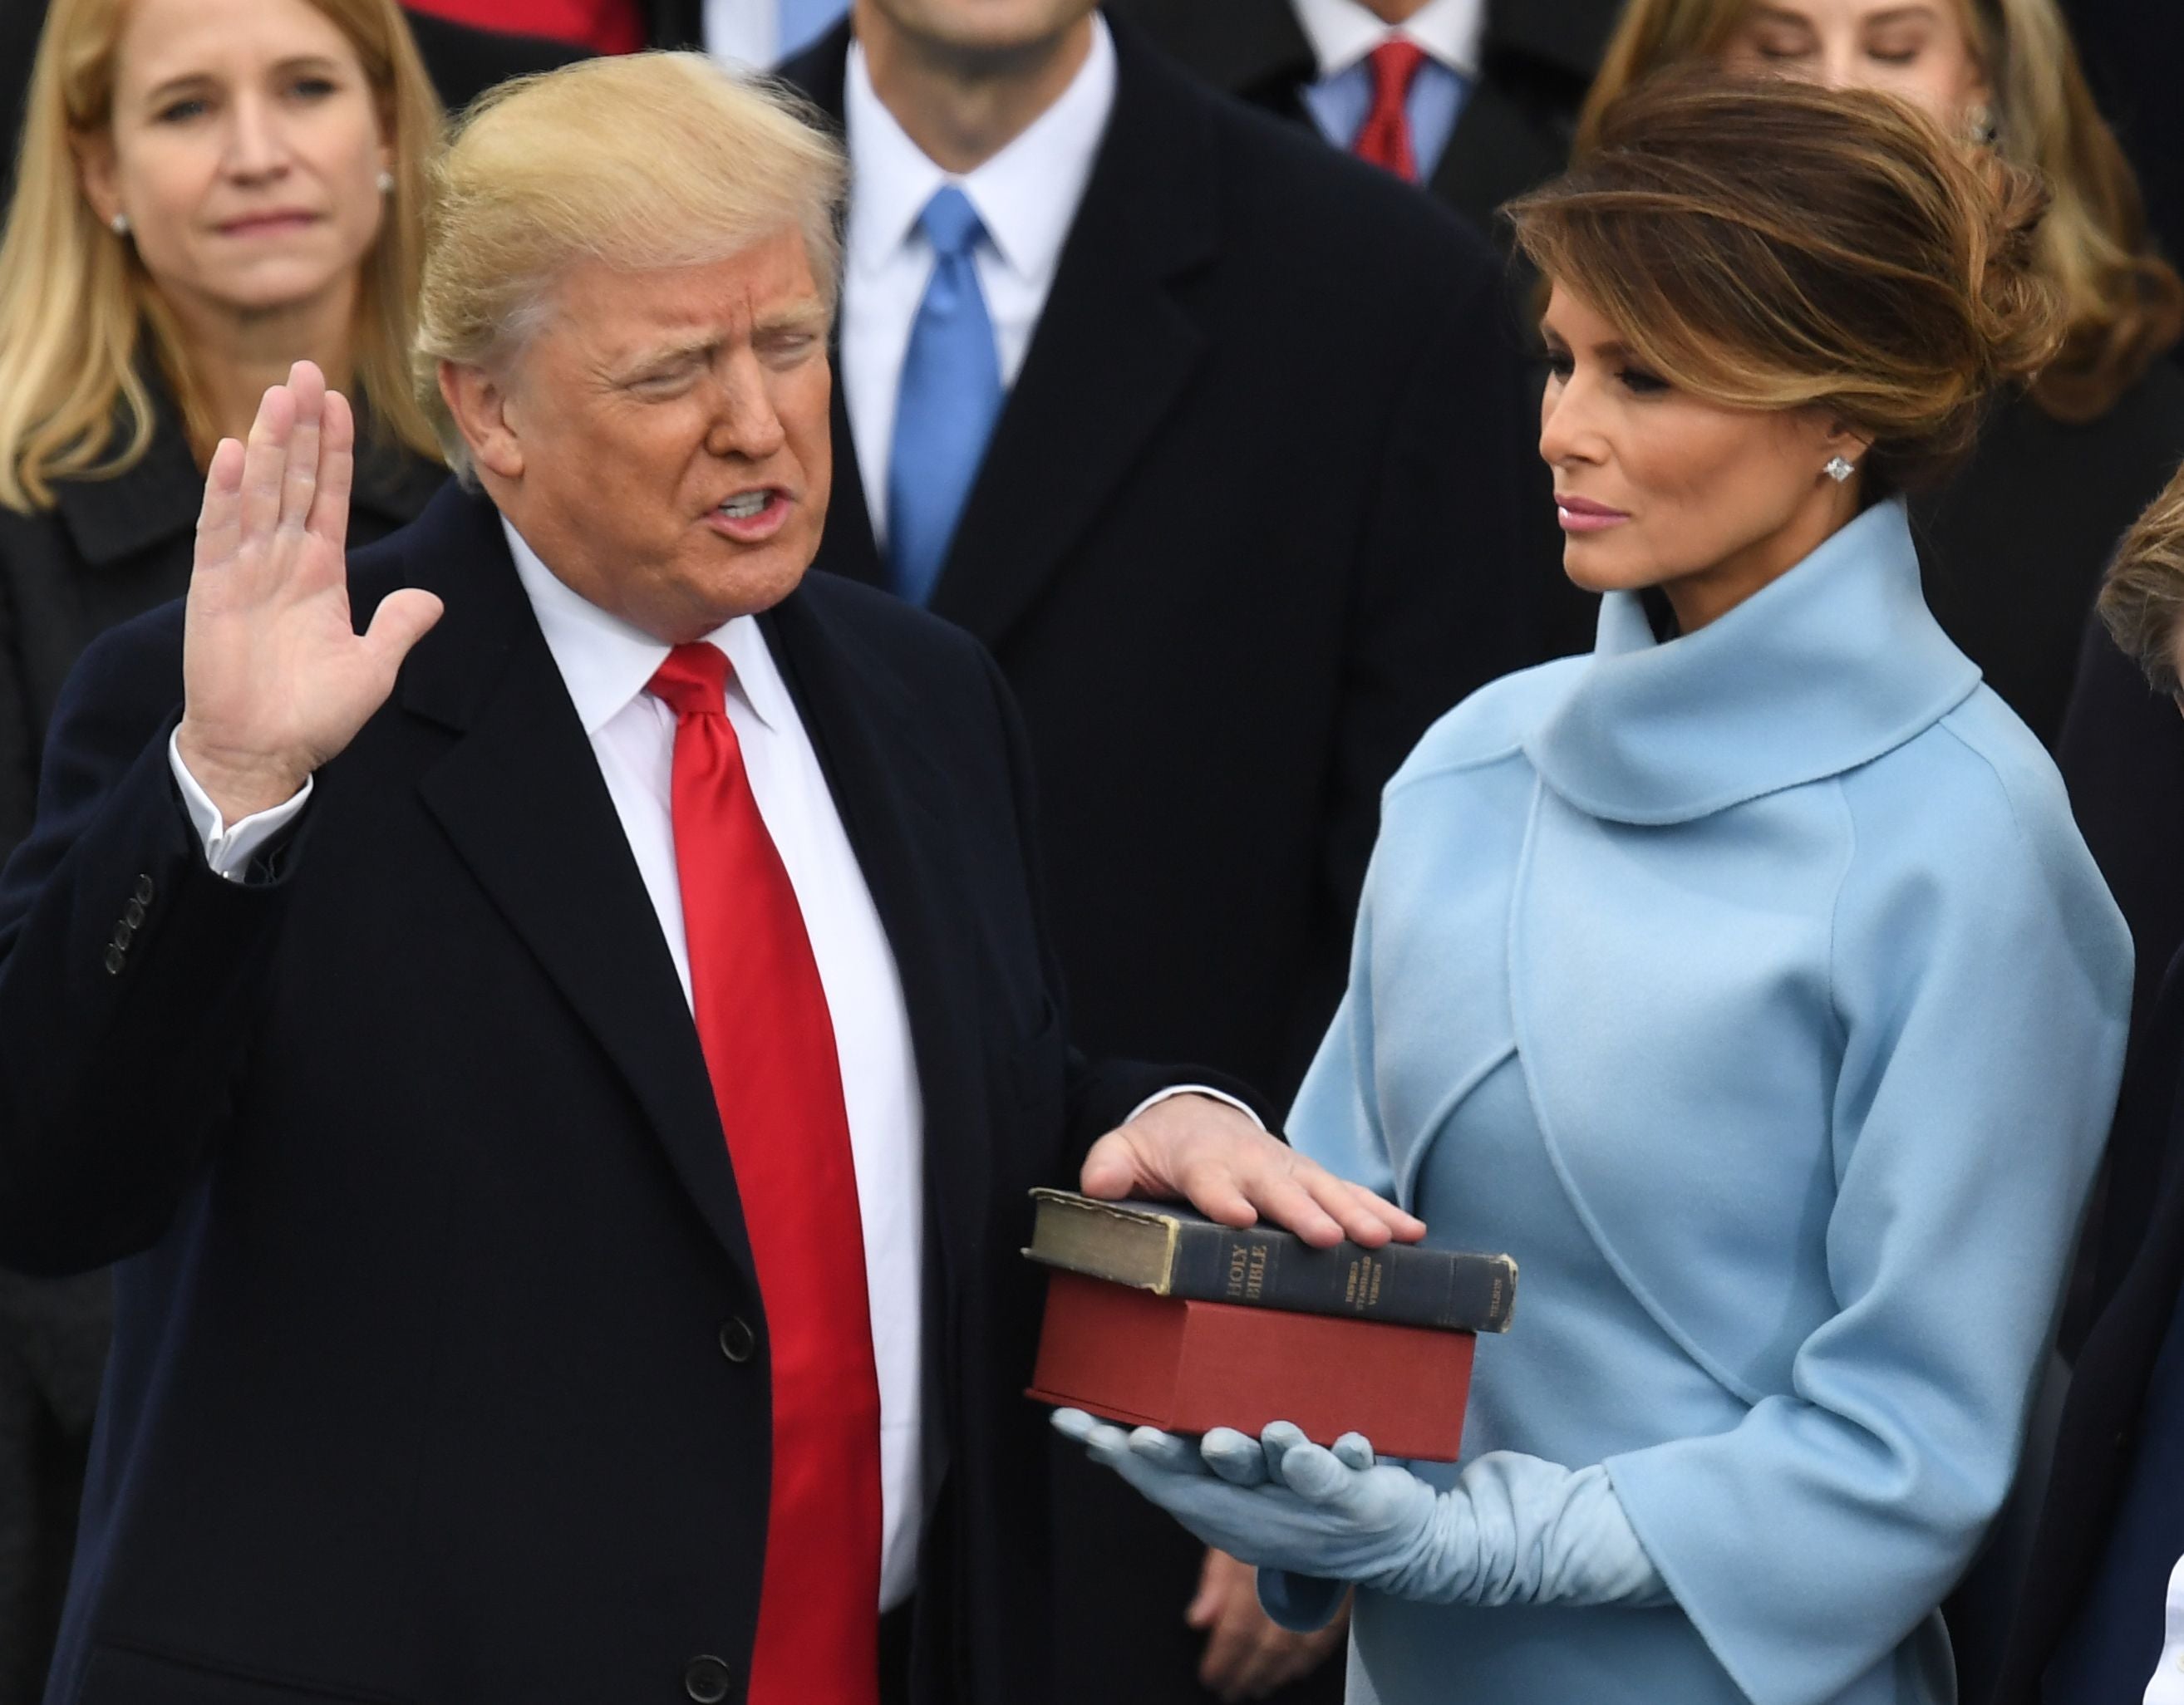 Melania Trump holds the Bible as her husband Donald Trump is sworn in as president on 20 January, 2016 (Photo by Mark RALSTON / AFP) (Photo by MARK RALSTON/AFP via Getty Images)